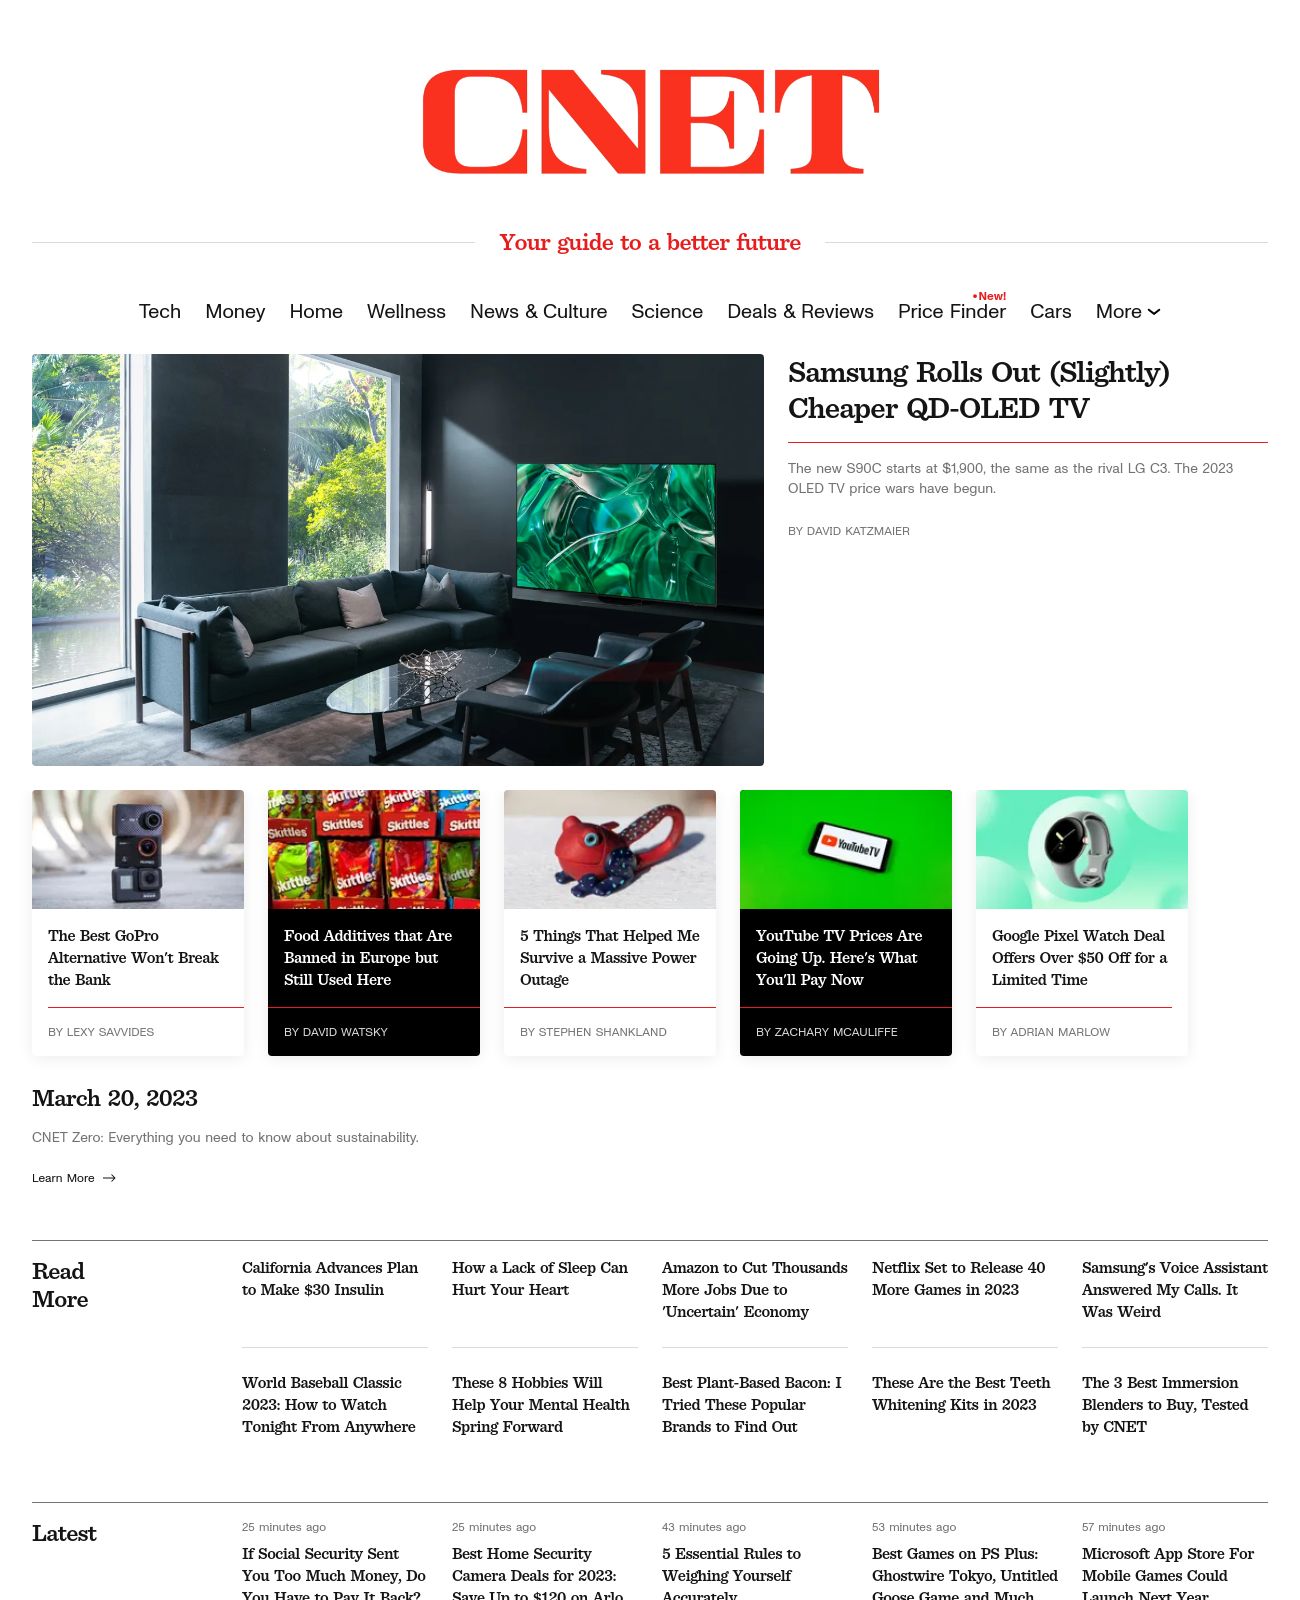 CNET at 2023-03-20 15:30:15-07:00 local time